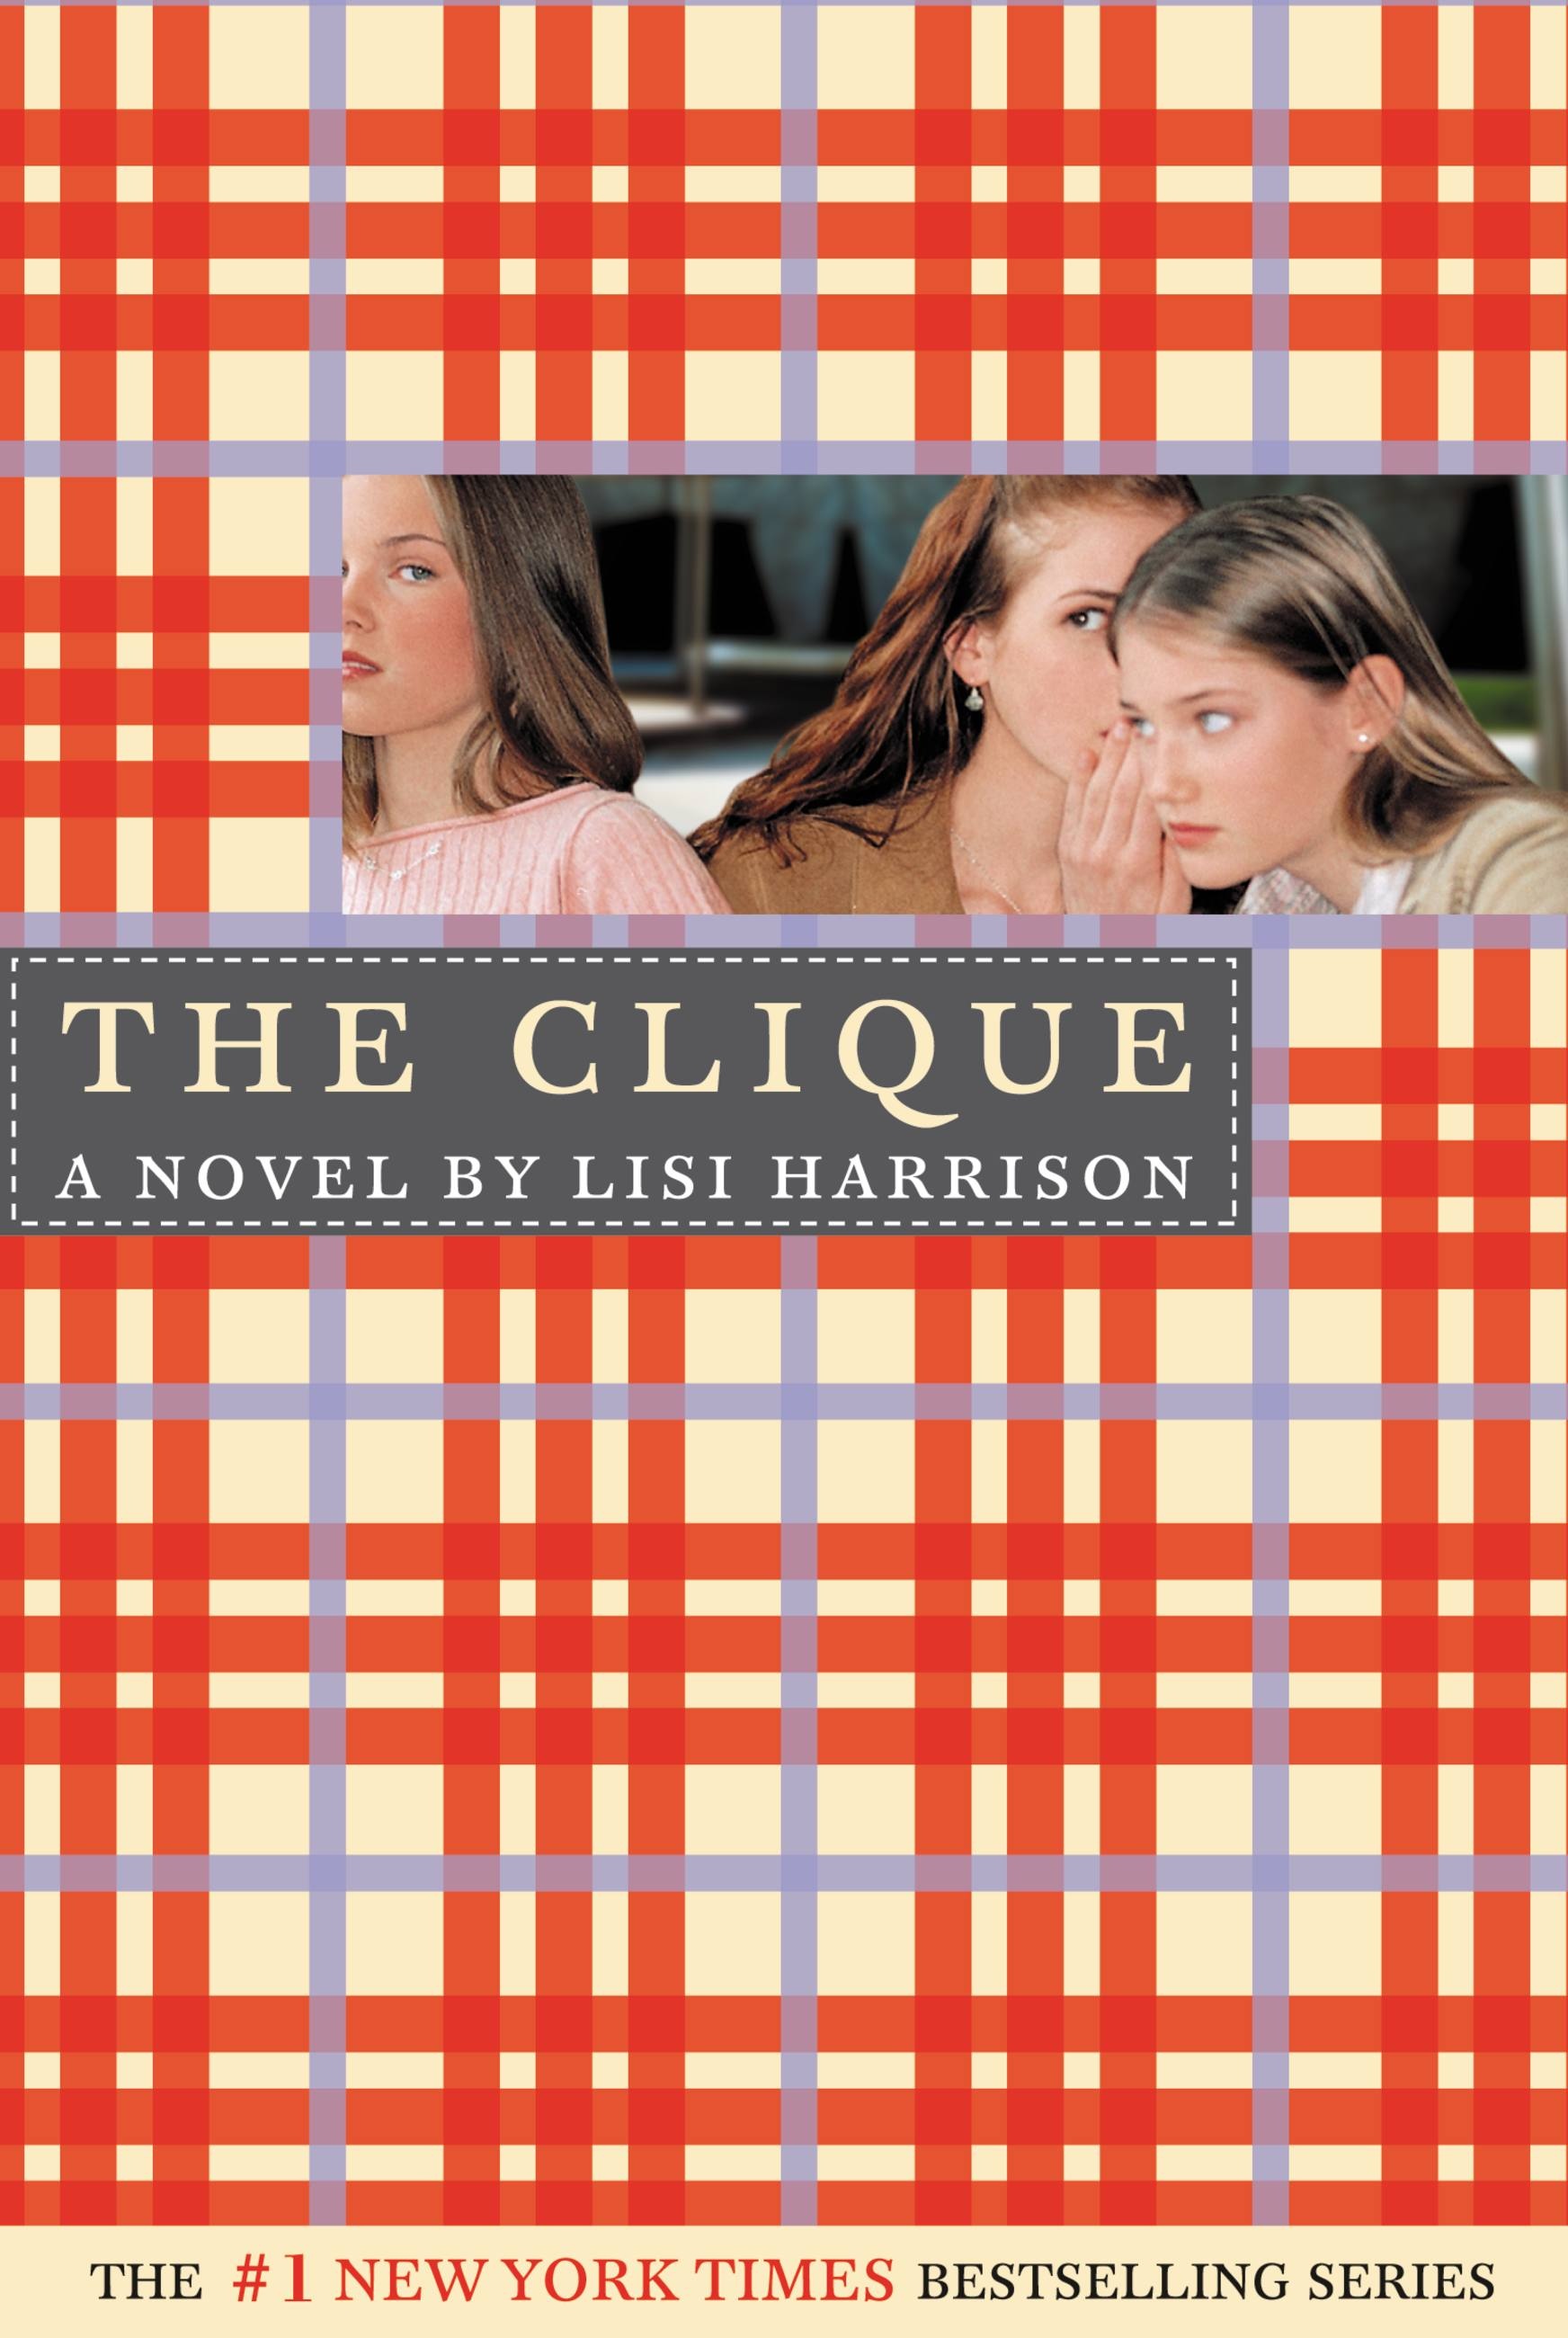 The cover of the first Clique book